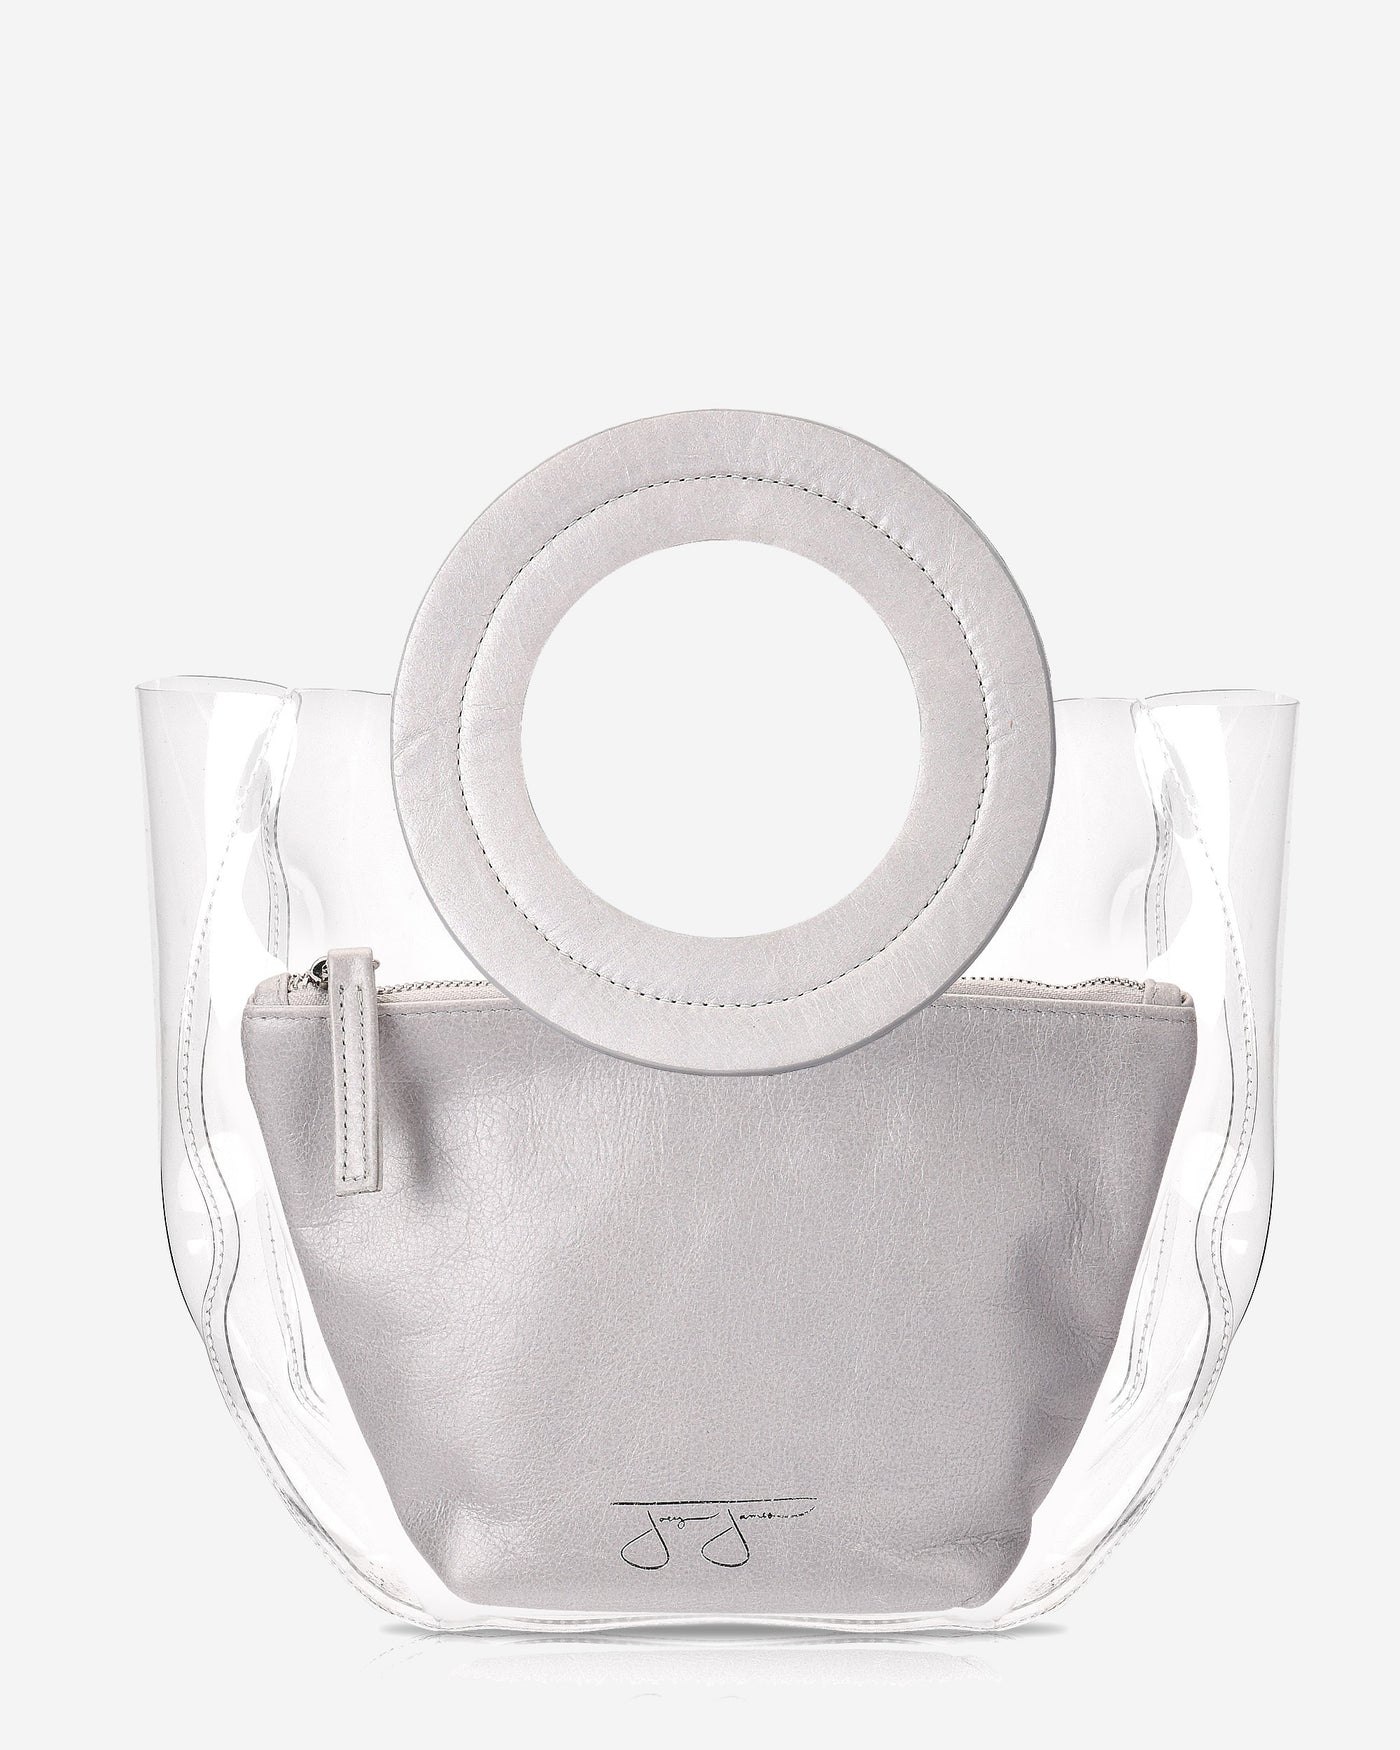 Lacey Bag - Silver Lacey Clear Bag Joey James, The Label   